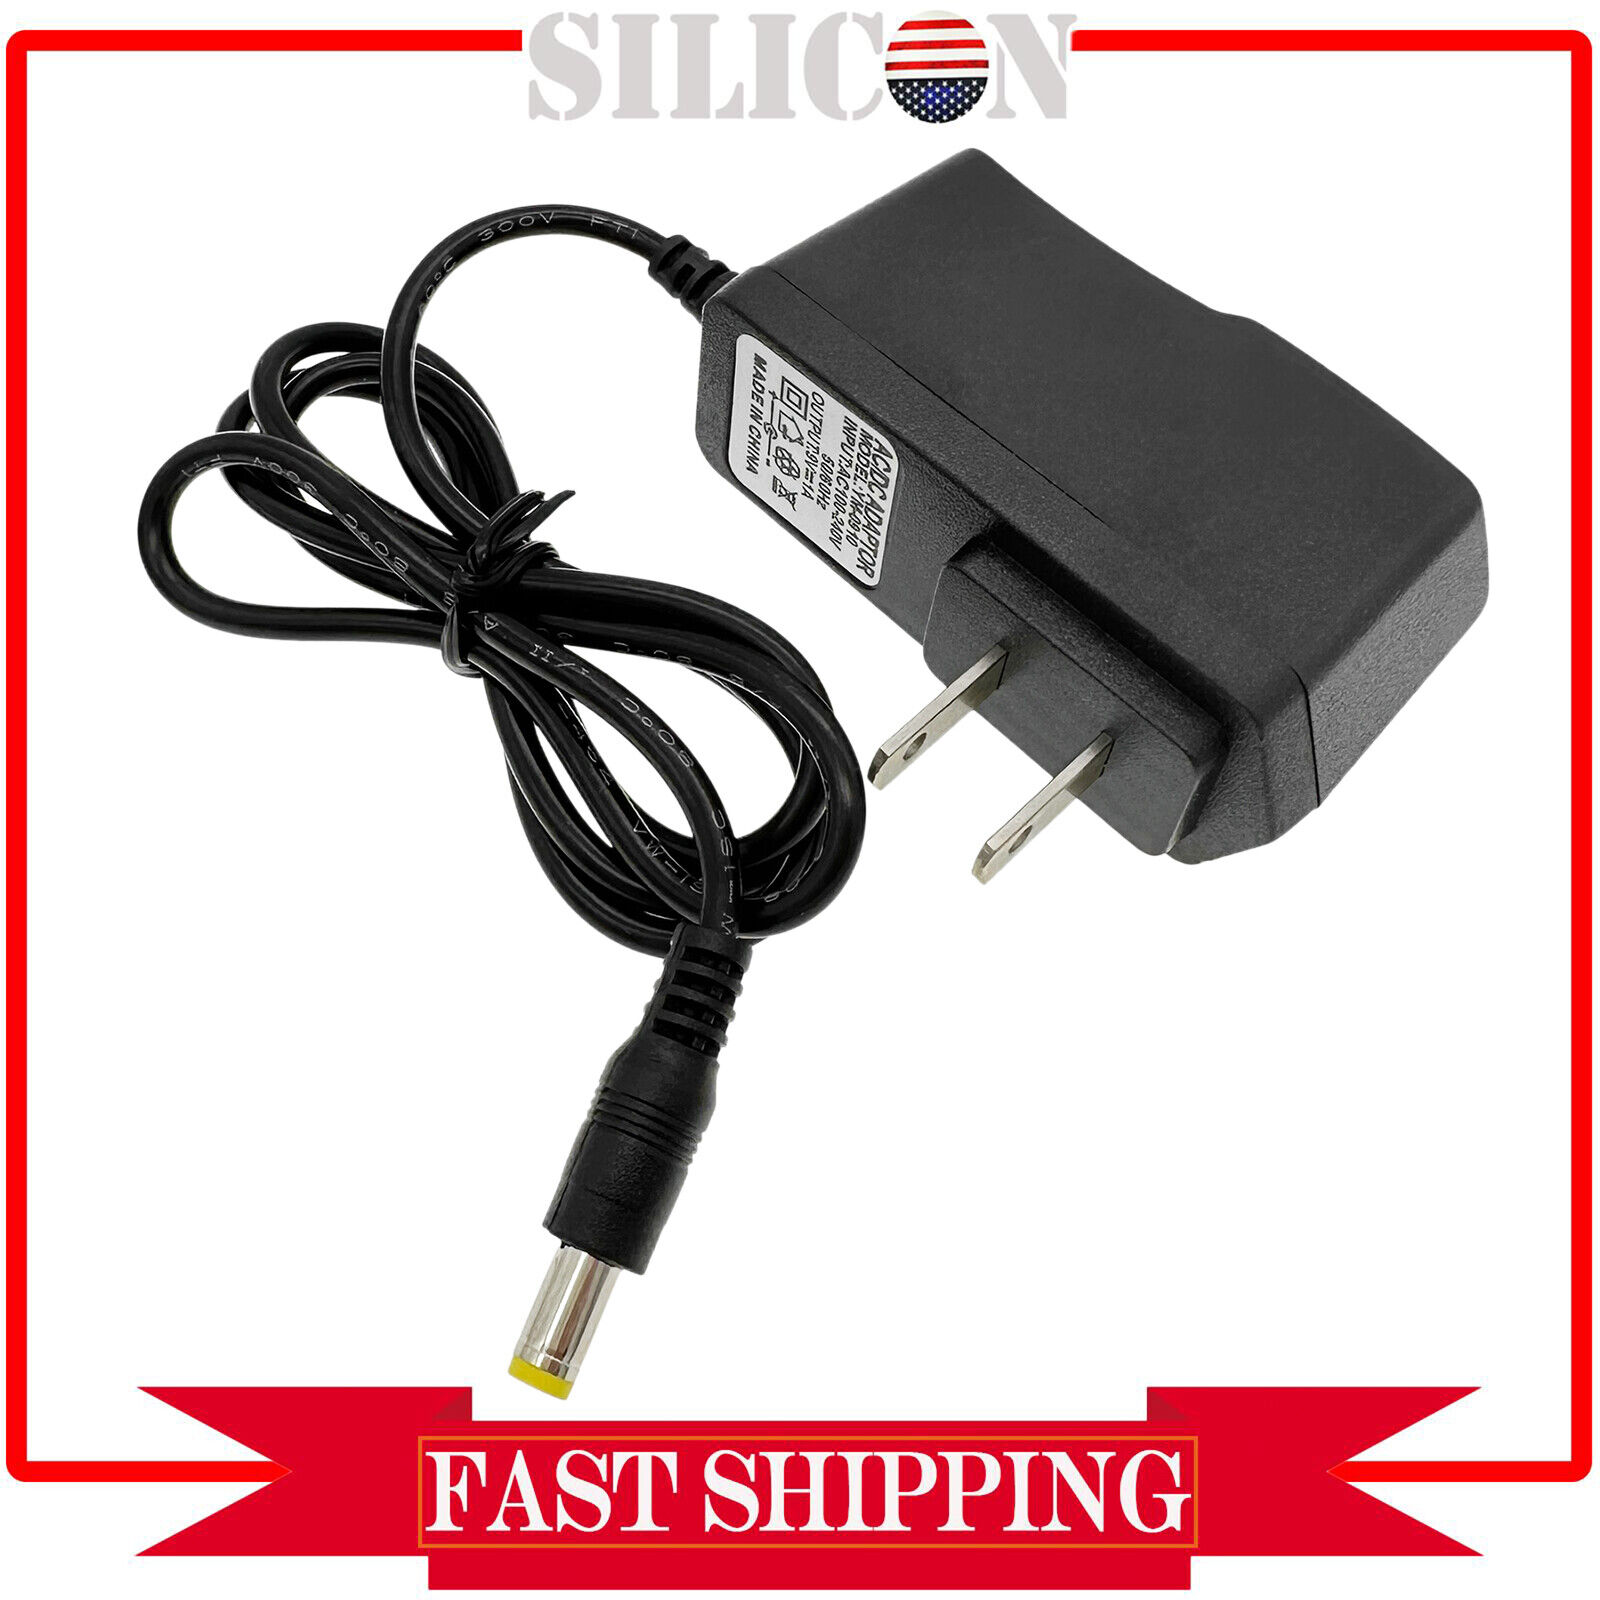 New 9V AC/DC Adapter Power Supply Cord for Casio AD-5MR AD-5EL AD-5MLE AD-5MU